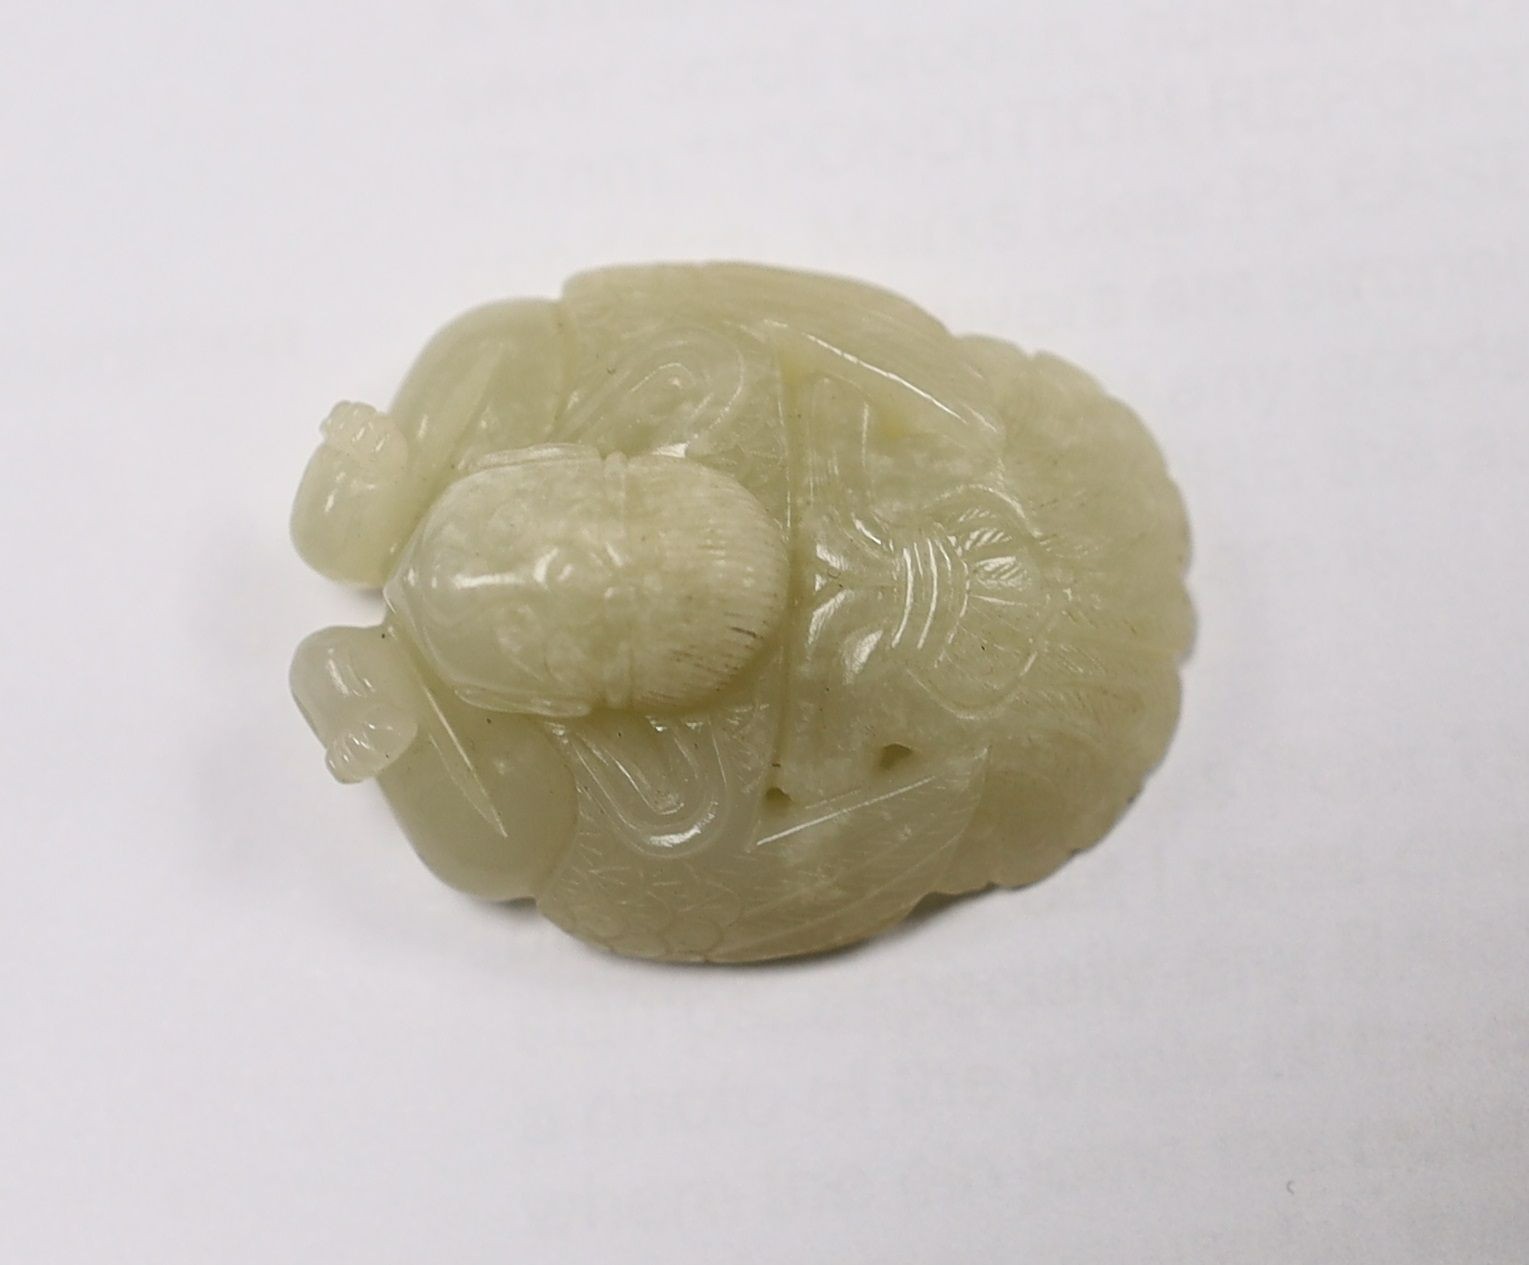 A Chinese pale celadon jade mount carved as a mythical half-man half-bird creature, 18th/19th century, 3.8cm high